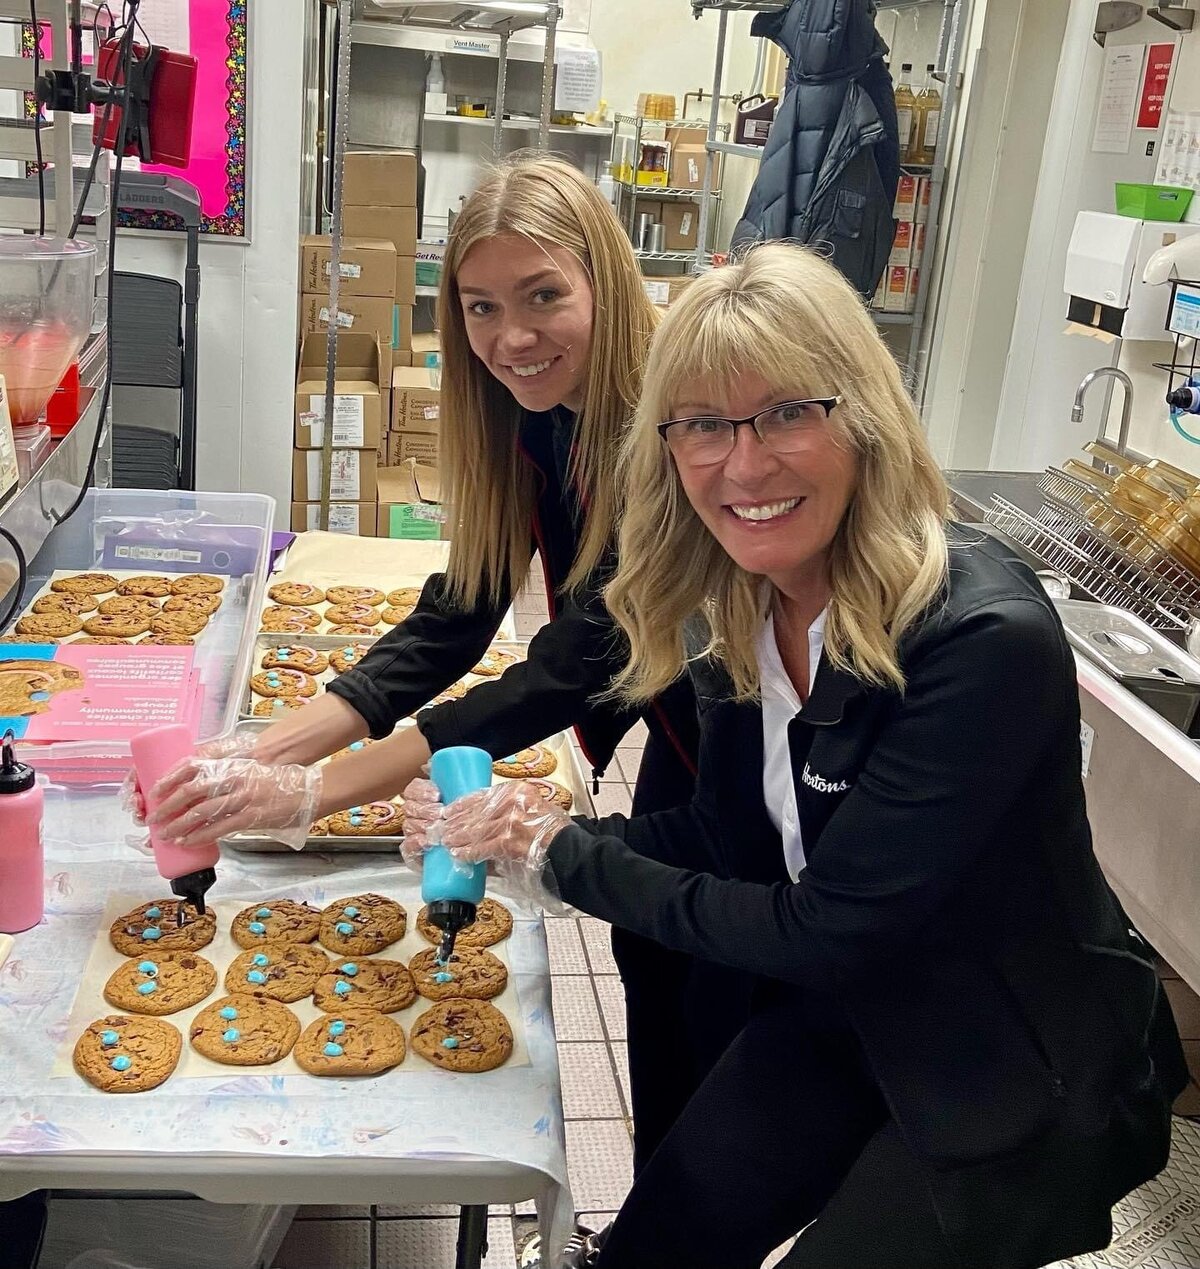 Owners decorating cookies during the Smile Cookie campaign